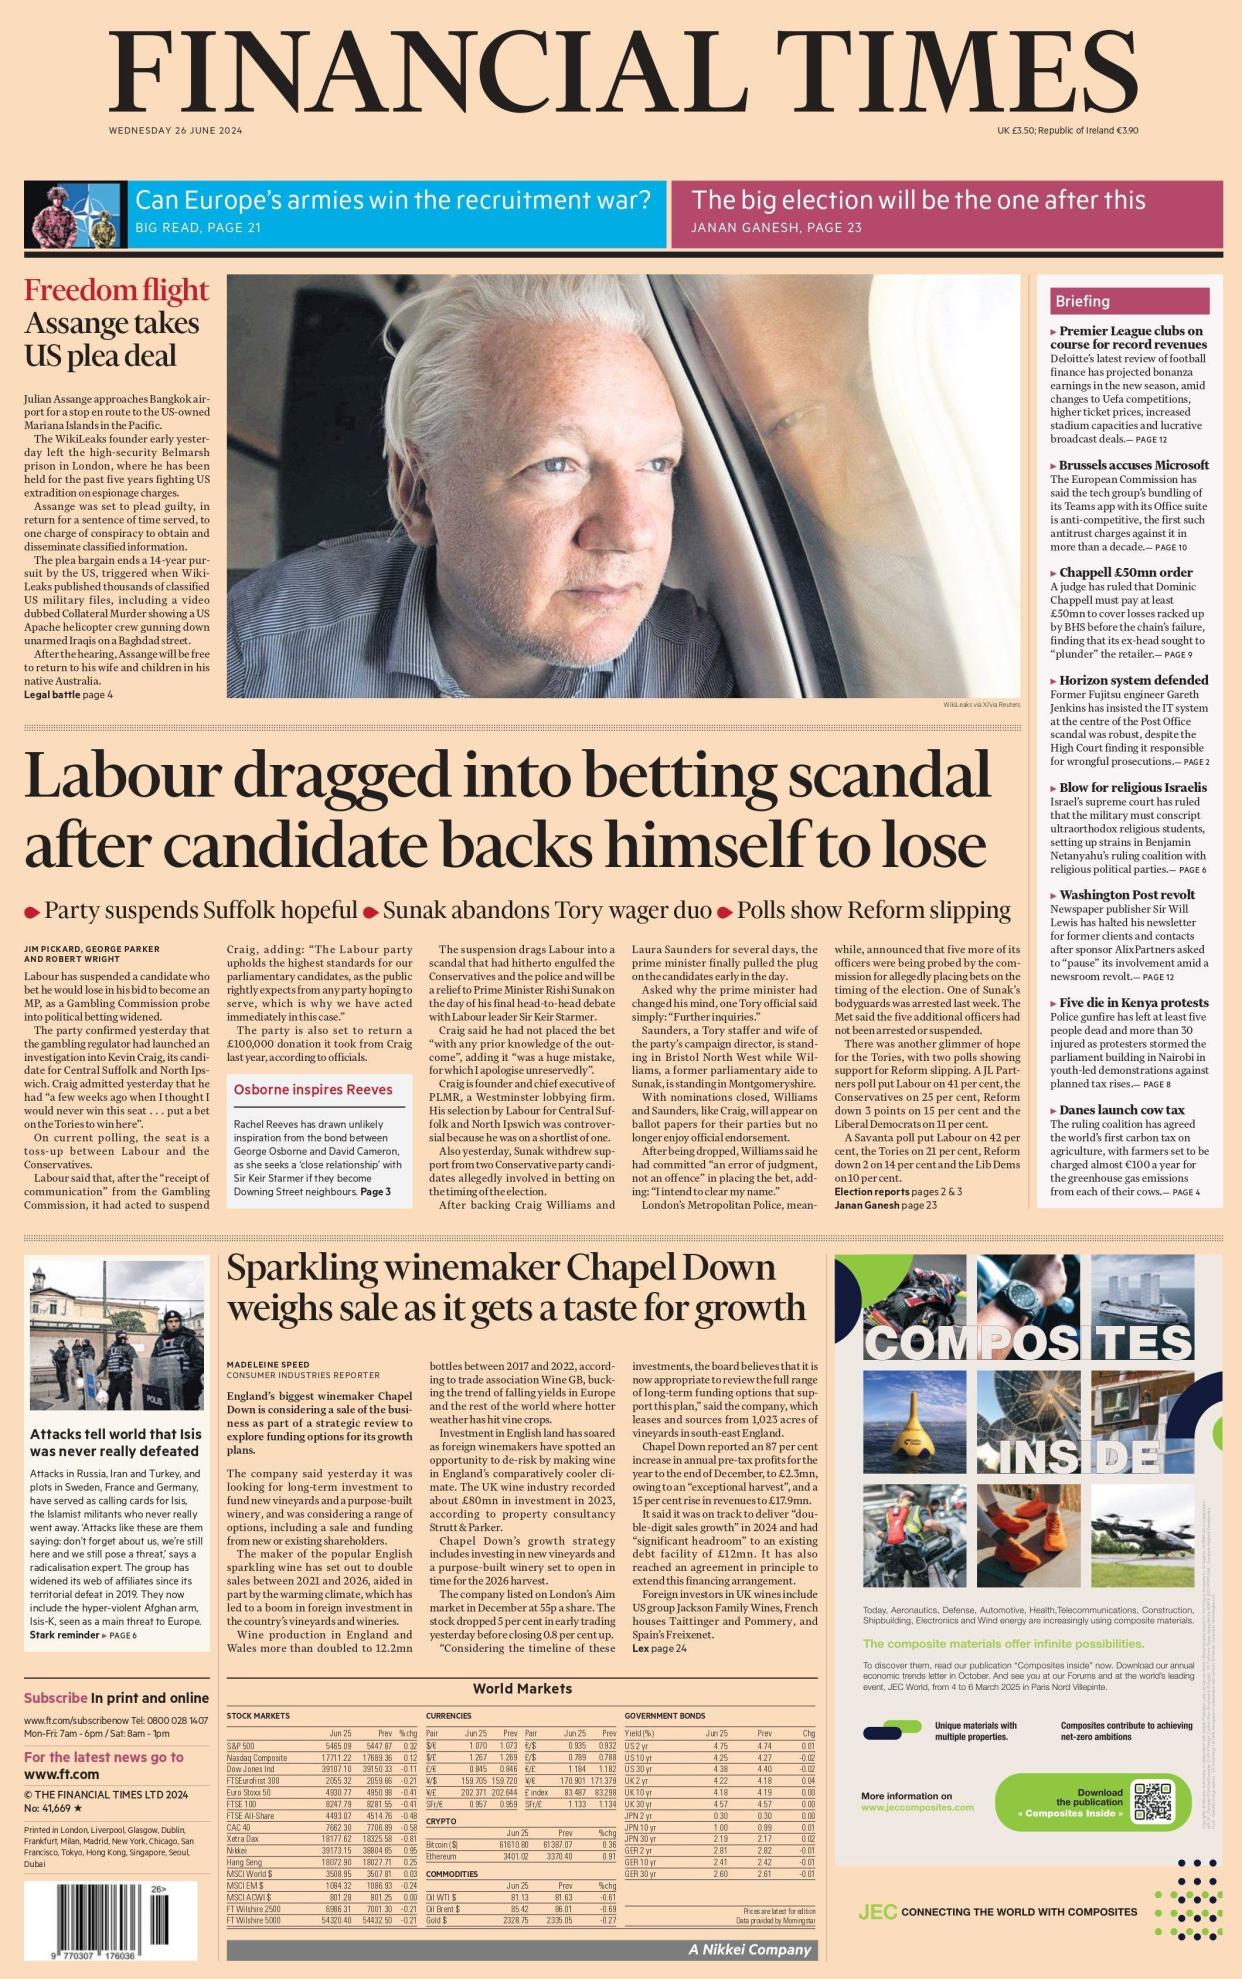 Financial Times: Labour dragged into betting scandal after candidate backs himself to lose